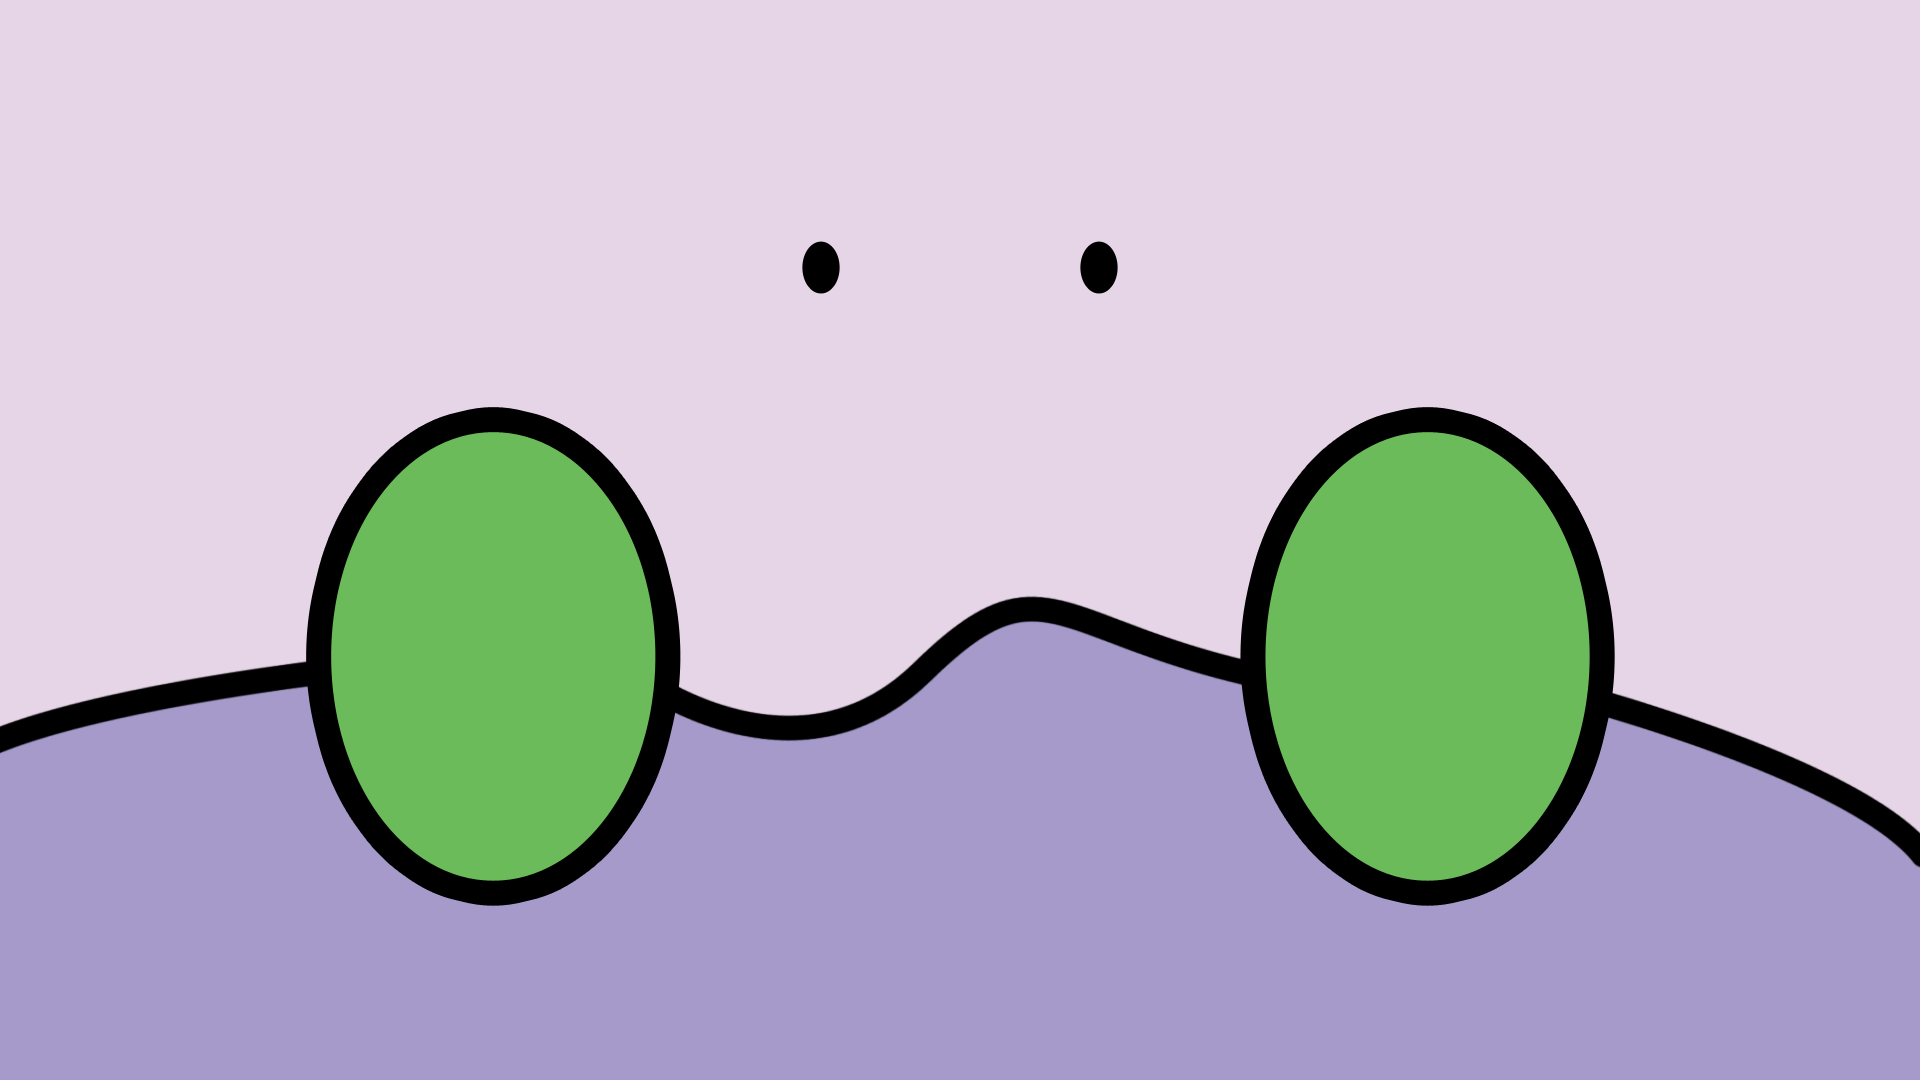 I made a wallpapers for you Goomy lovers